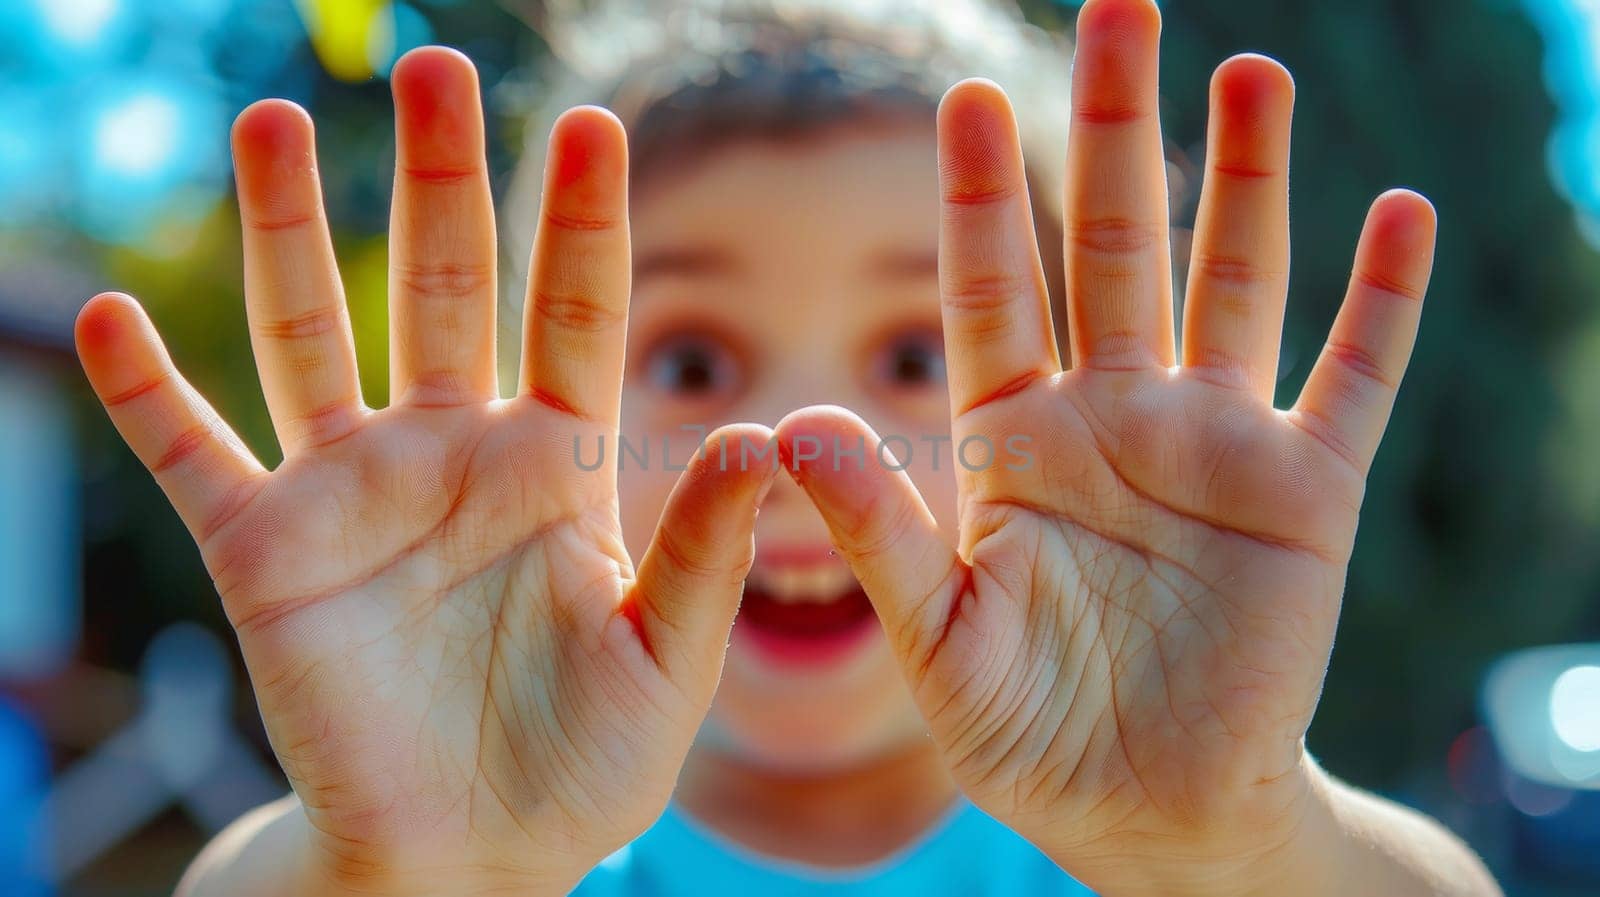 A young child with hands outstretched in front of a camera, AI by starush